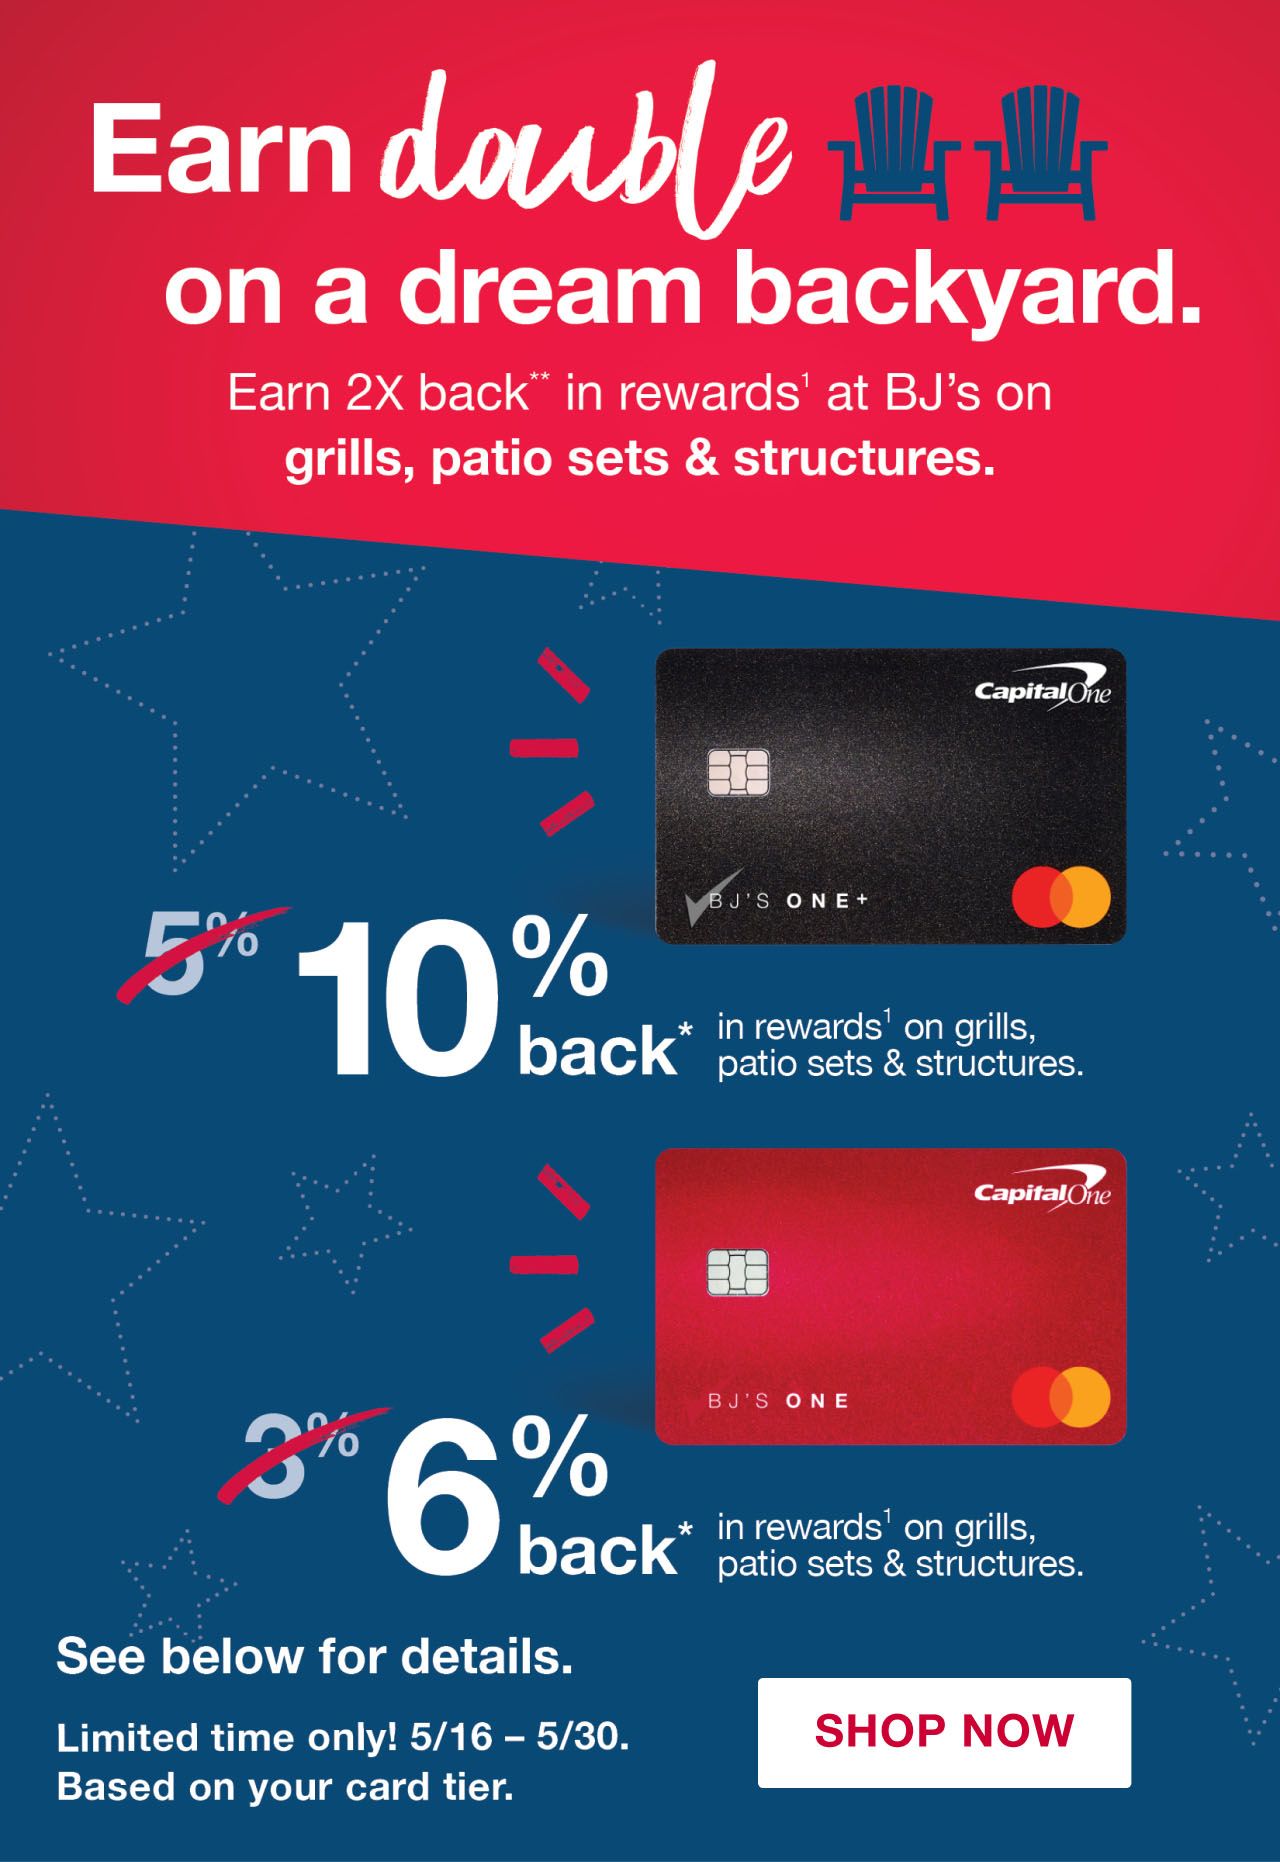 Earn double on a dream backyard. Earn 2x back** in rewards at1 BJ's on grills, patio sets and structures. BJ's One+™ Mastercard - 10% back* in rewards1 on grills, pati osets and structures. BJ's One™ Mastercard - 6% back* in rewards1 on grills, pati osets and structures. See below for details. Limited time only! 5/16-5/30. Based on your card tier. Click to shop now